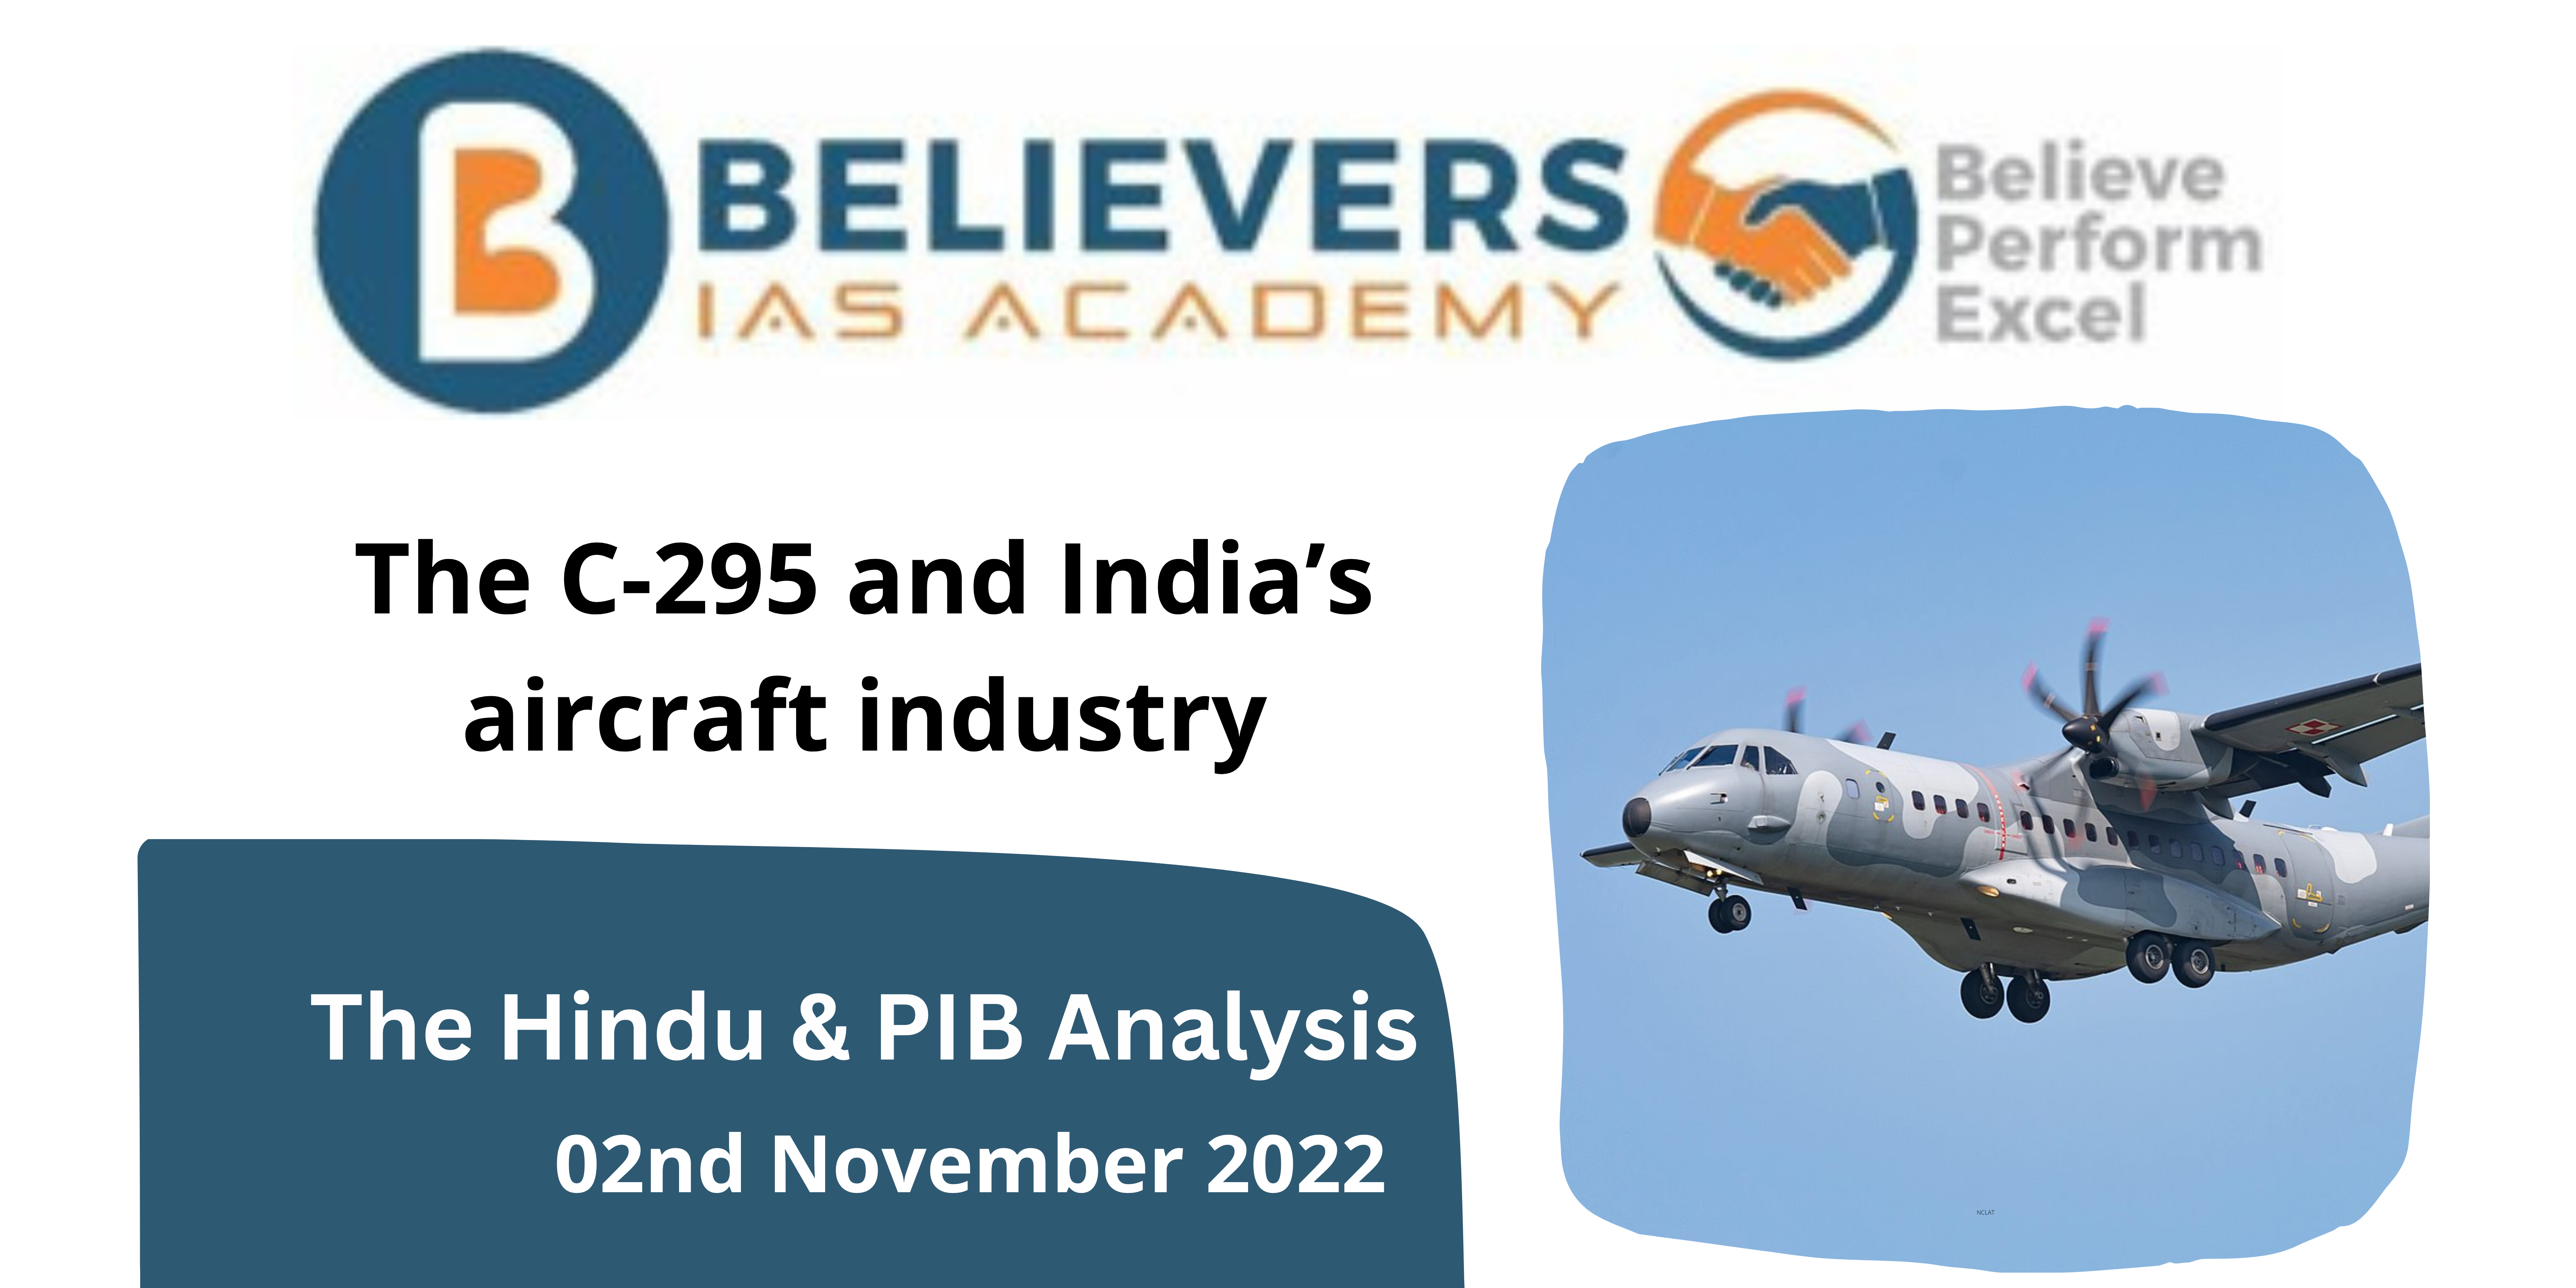 The C-295 and India’s aircraft industry